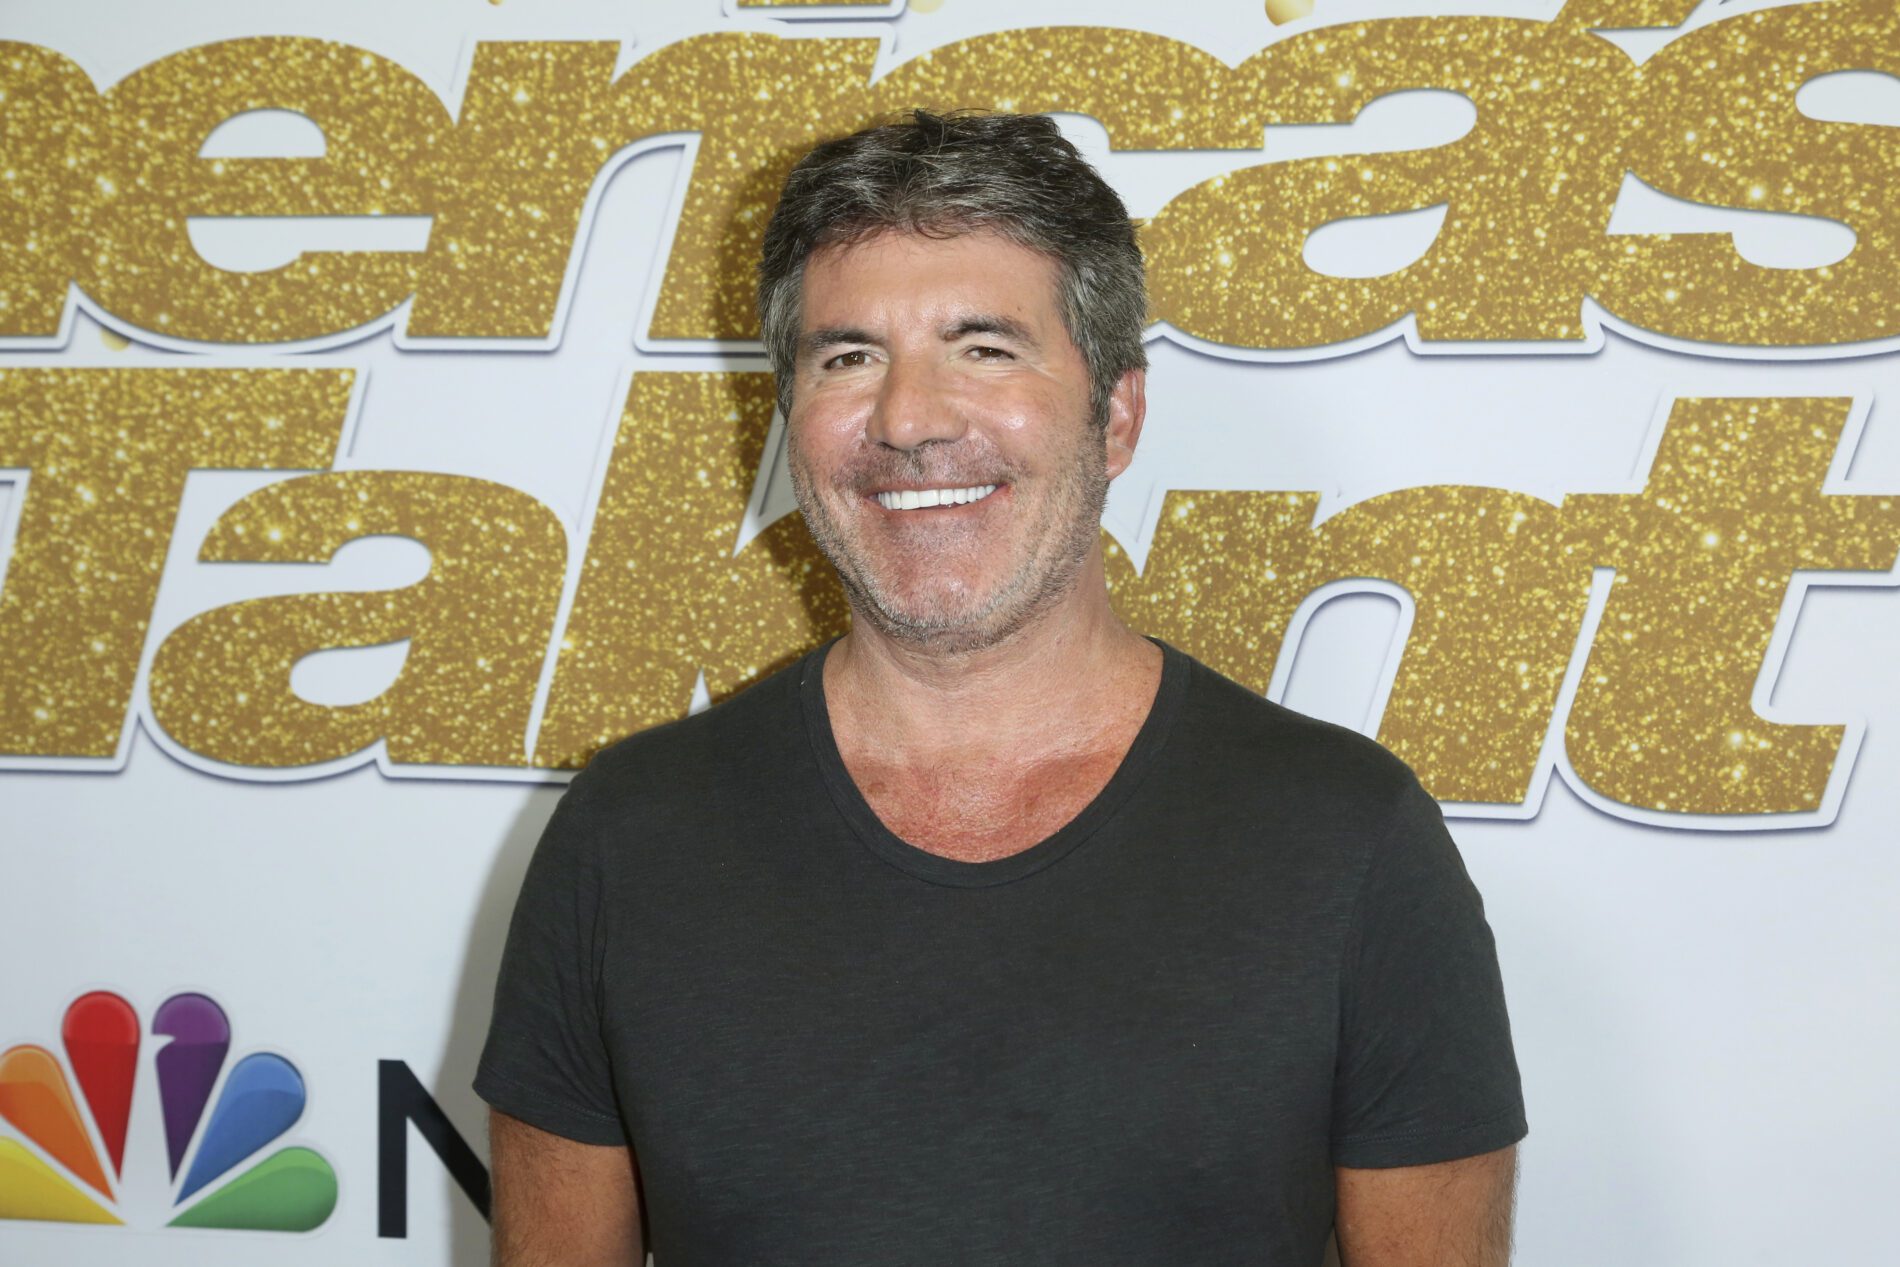 Simon Cowell over the years